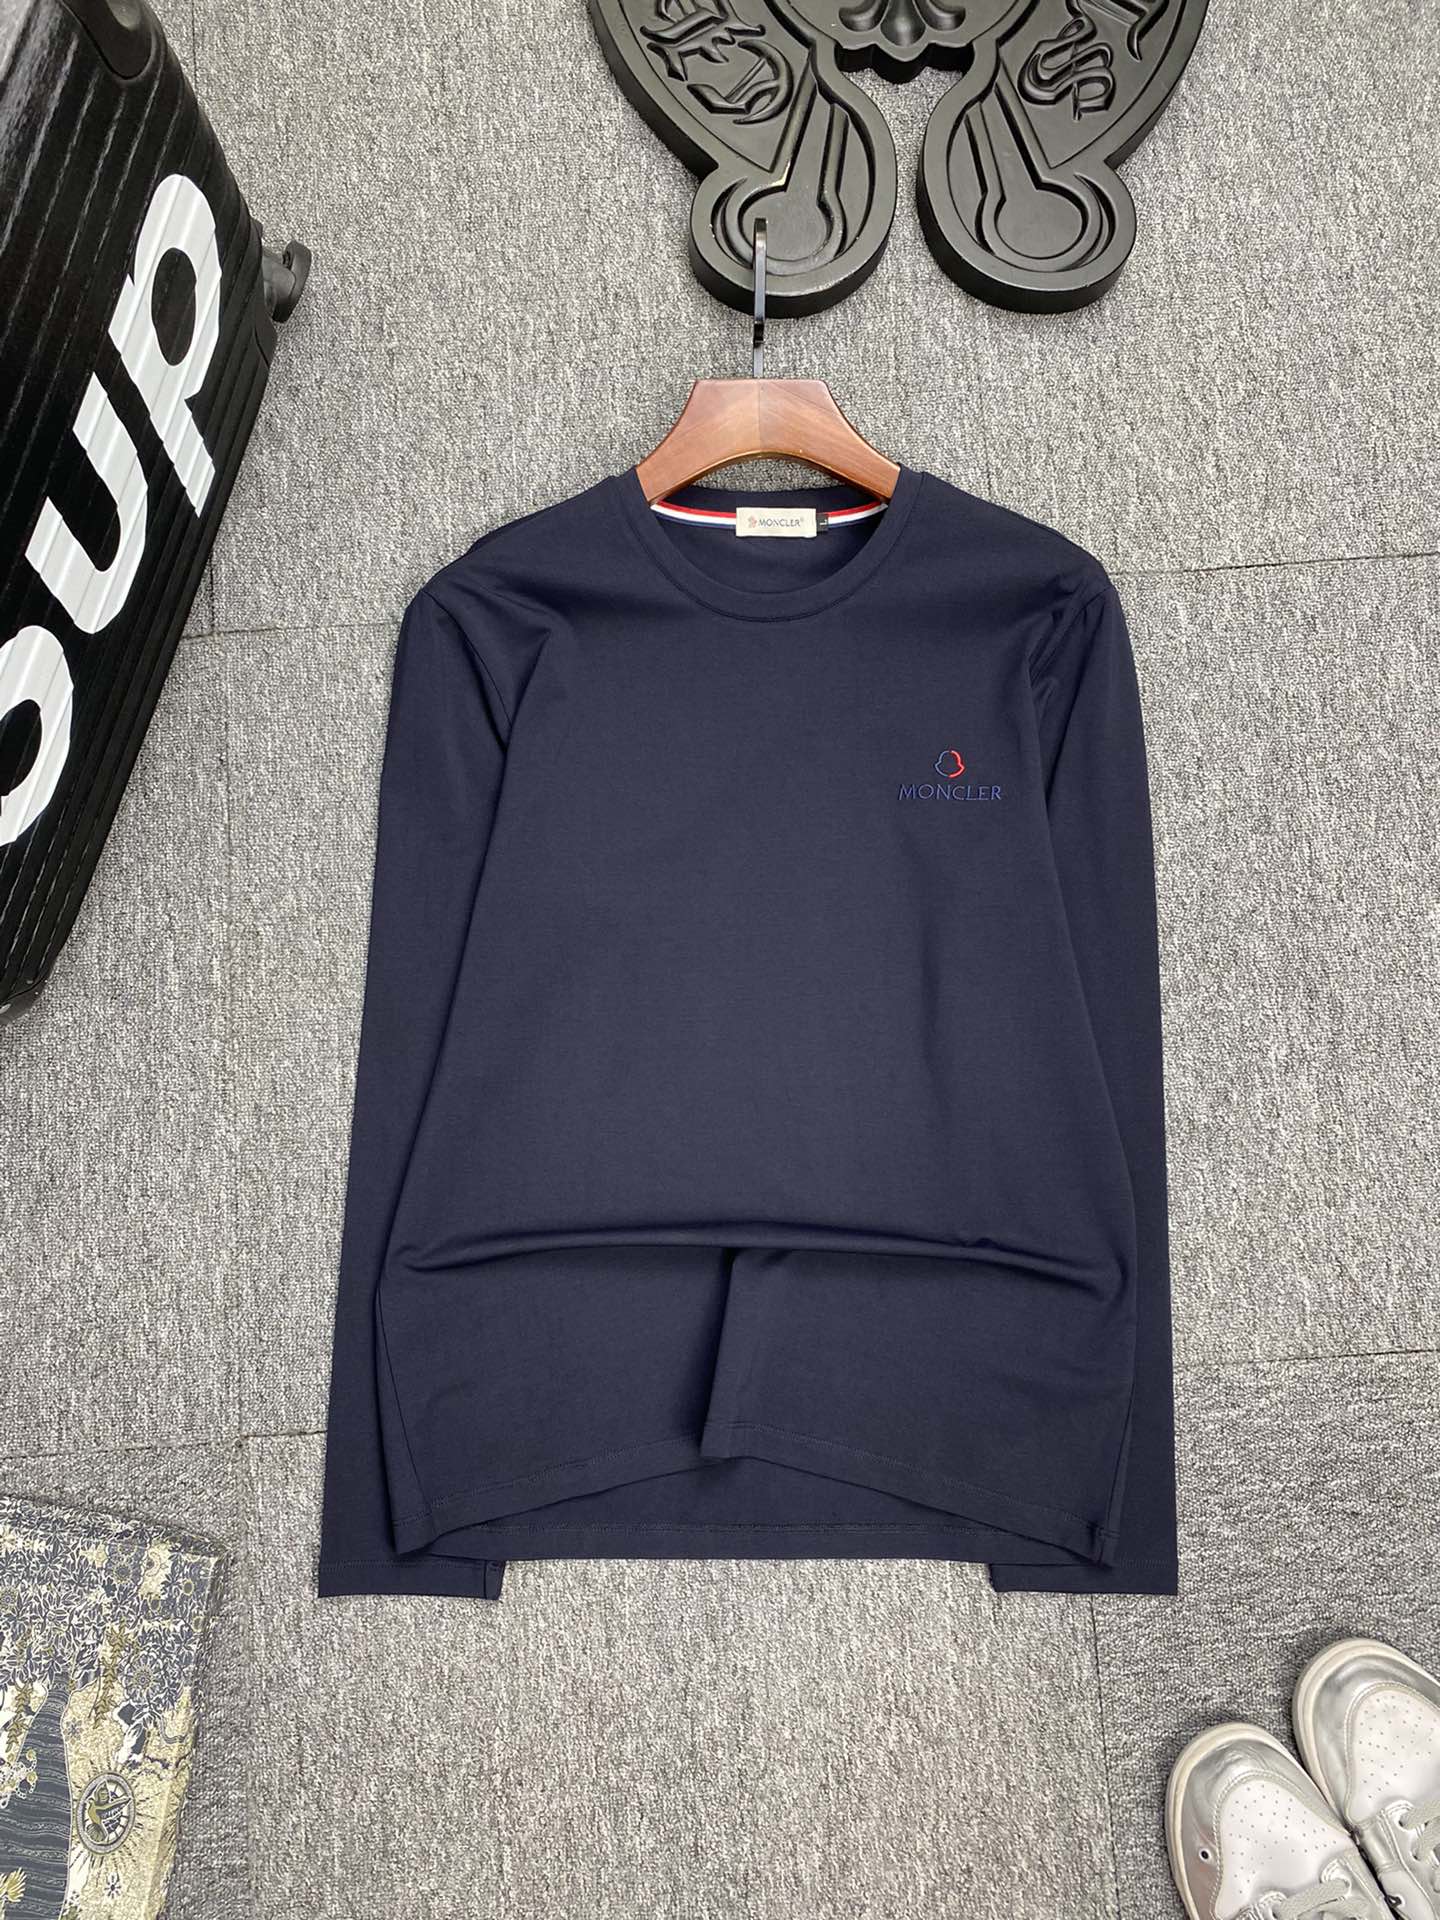 Moncler Clothing T-Shirt Men Fall Collection Long Sleeve